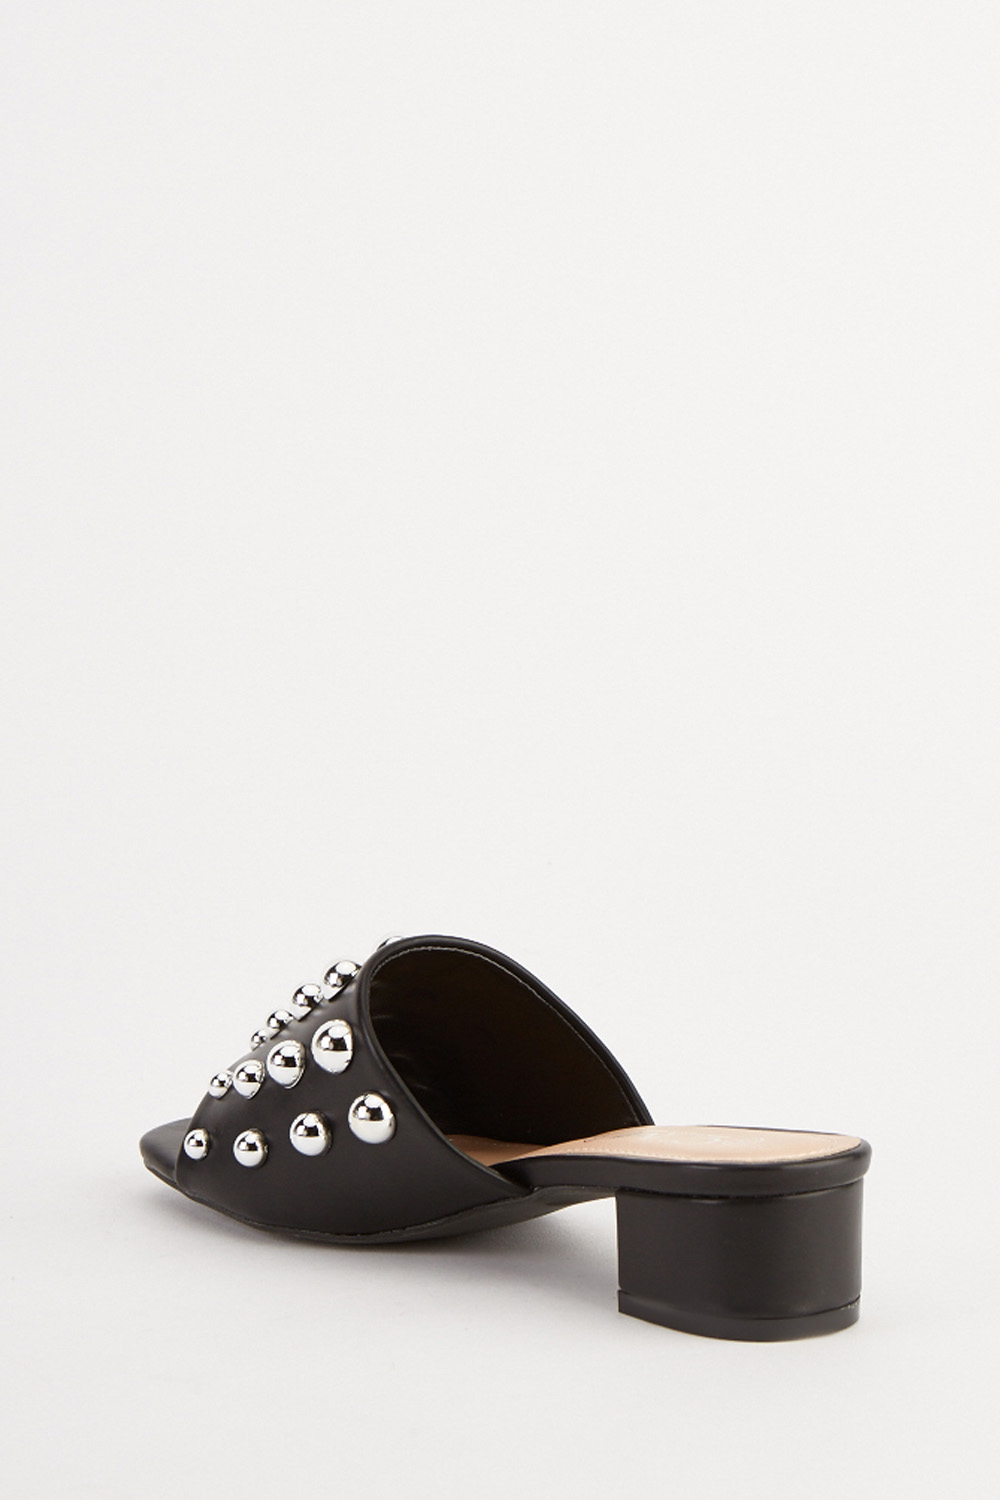 Studded Black Mule Shoes - Just $7